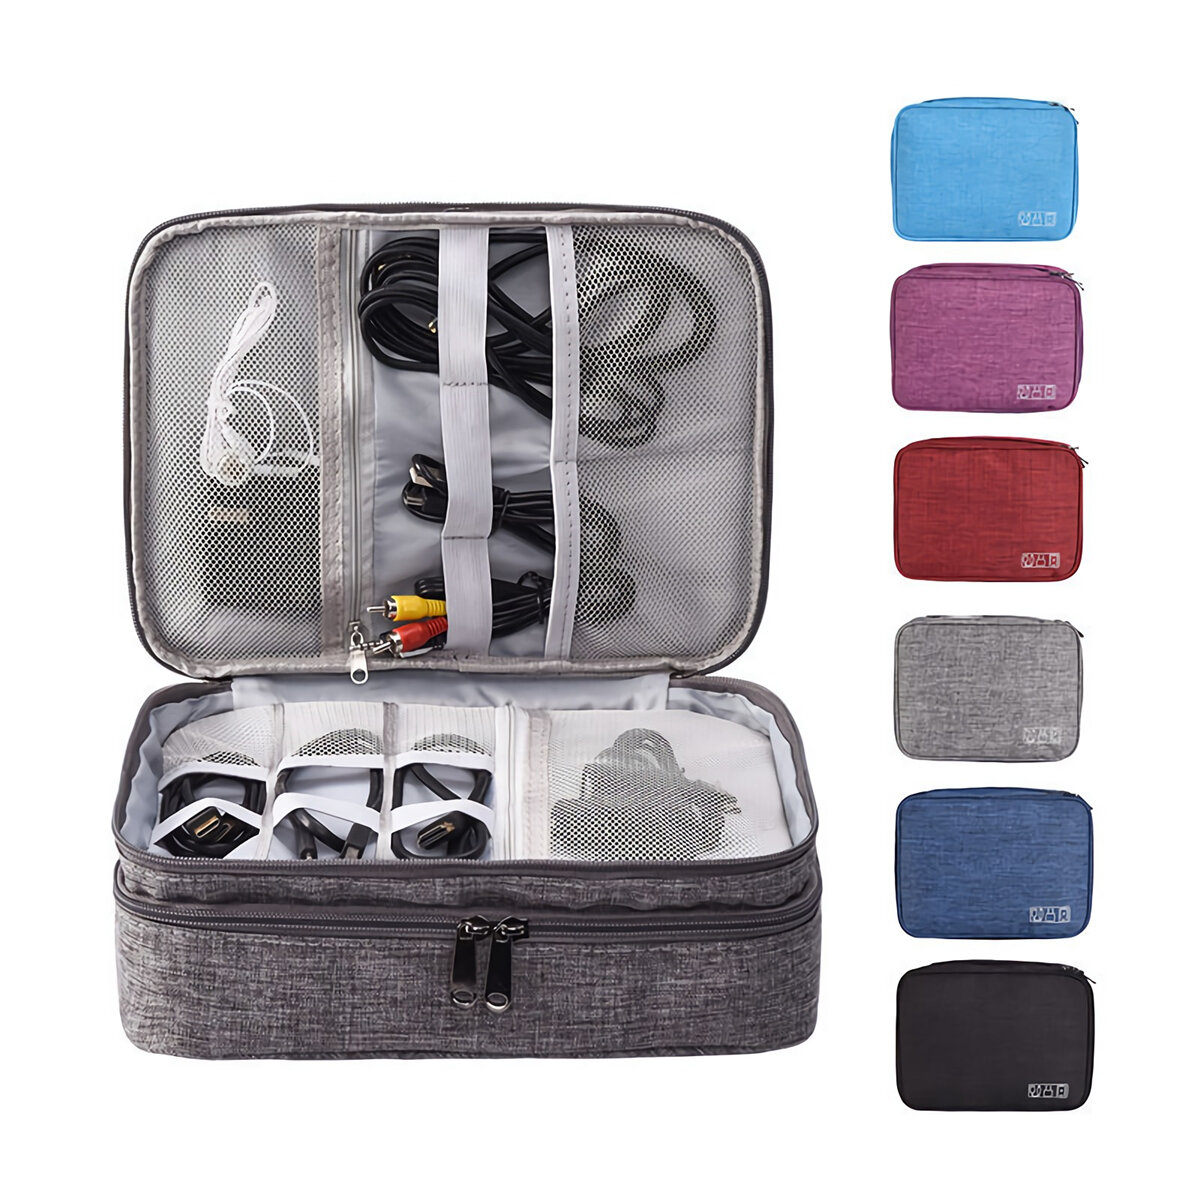 Cable Organizer Bag Travel Storage Bag Electronic Gadget Charger Headphones Case USB Wire Mouse U Di